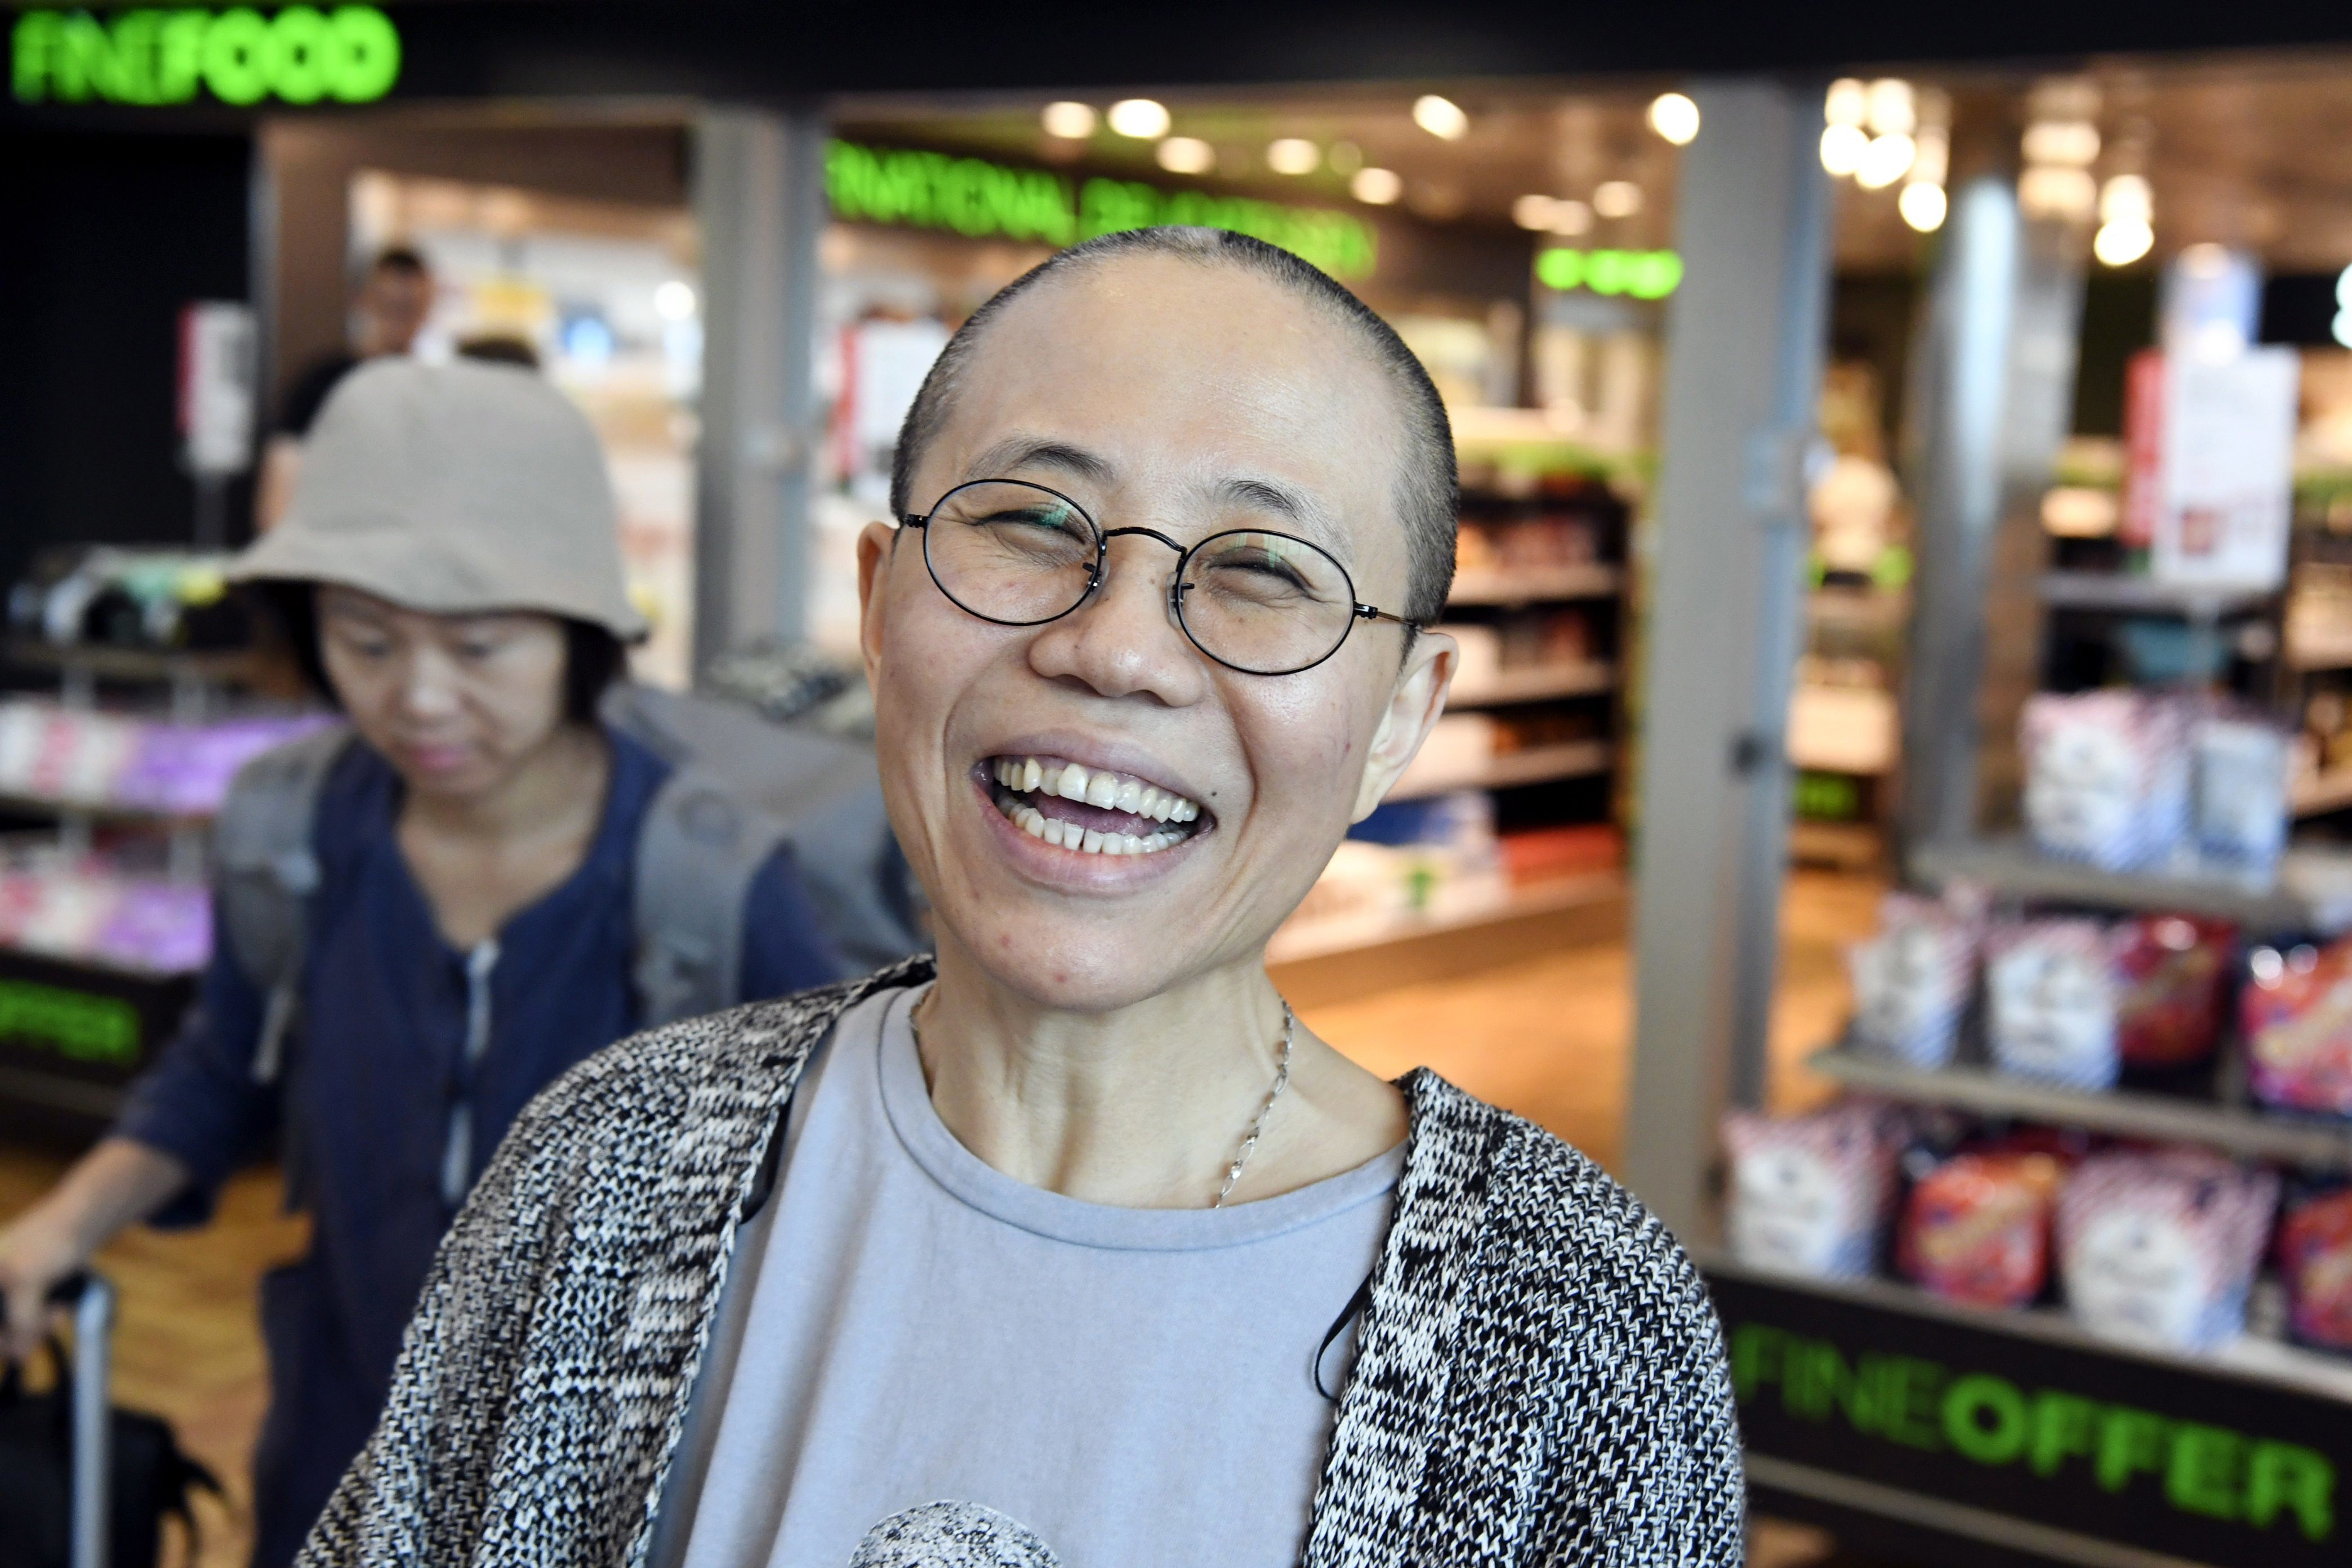 Liu Xia, widow of Chinese Nobel Peace Prize winner and dissident Liu Xiaobo, is in New York to see her friend Liao Yiwu receive an award from the Václav Havel Library Foundation. Photo: AP